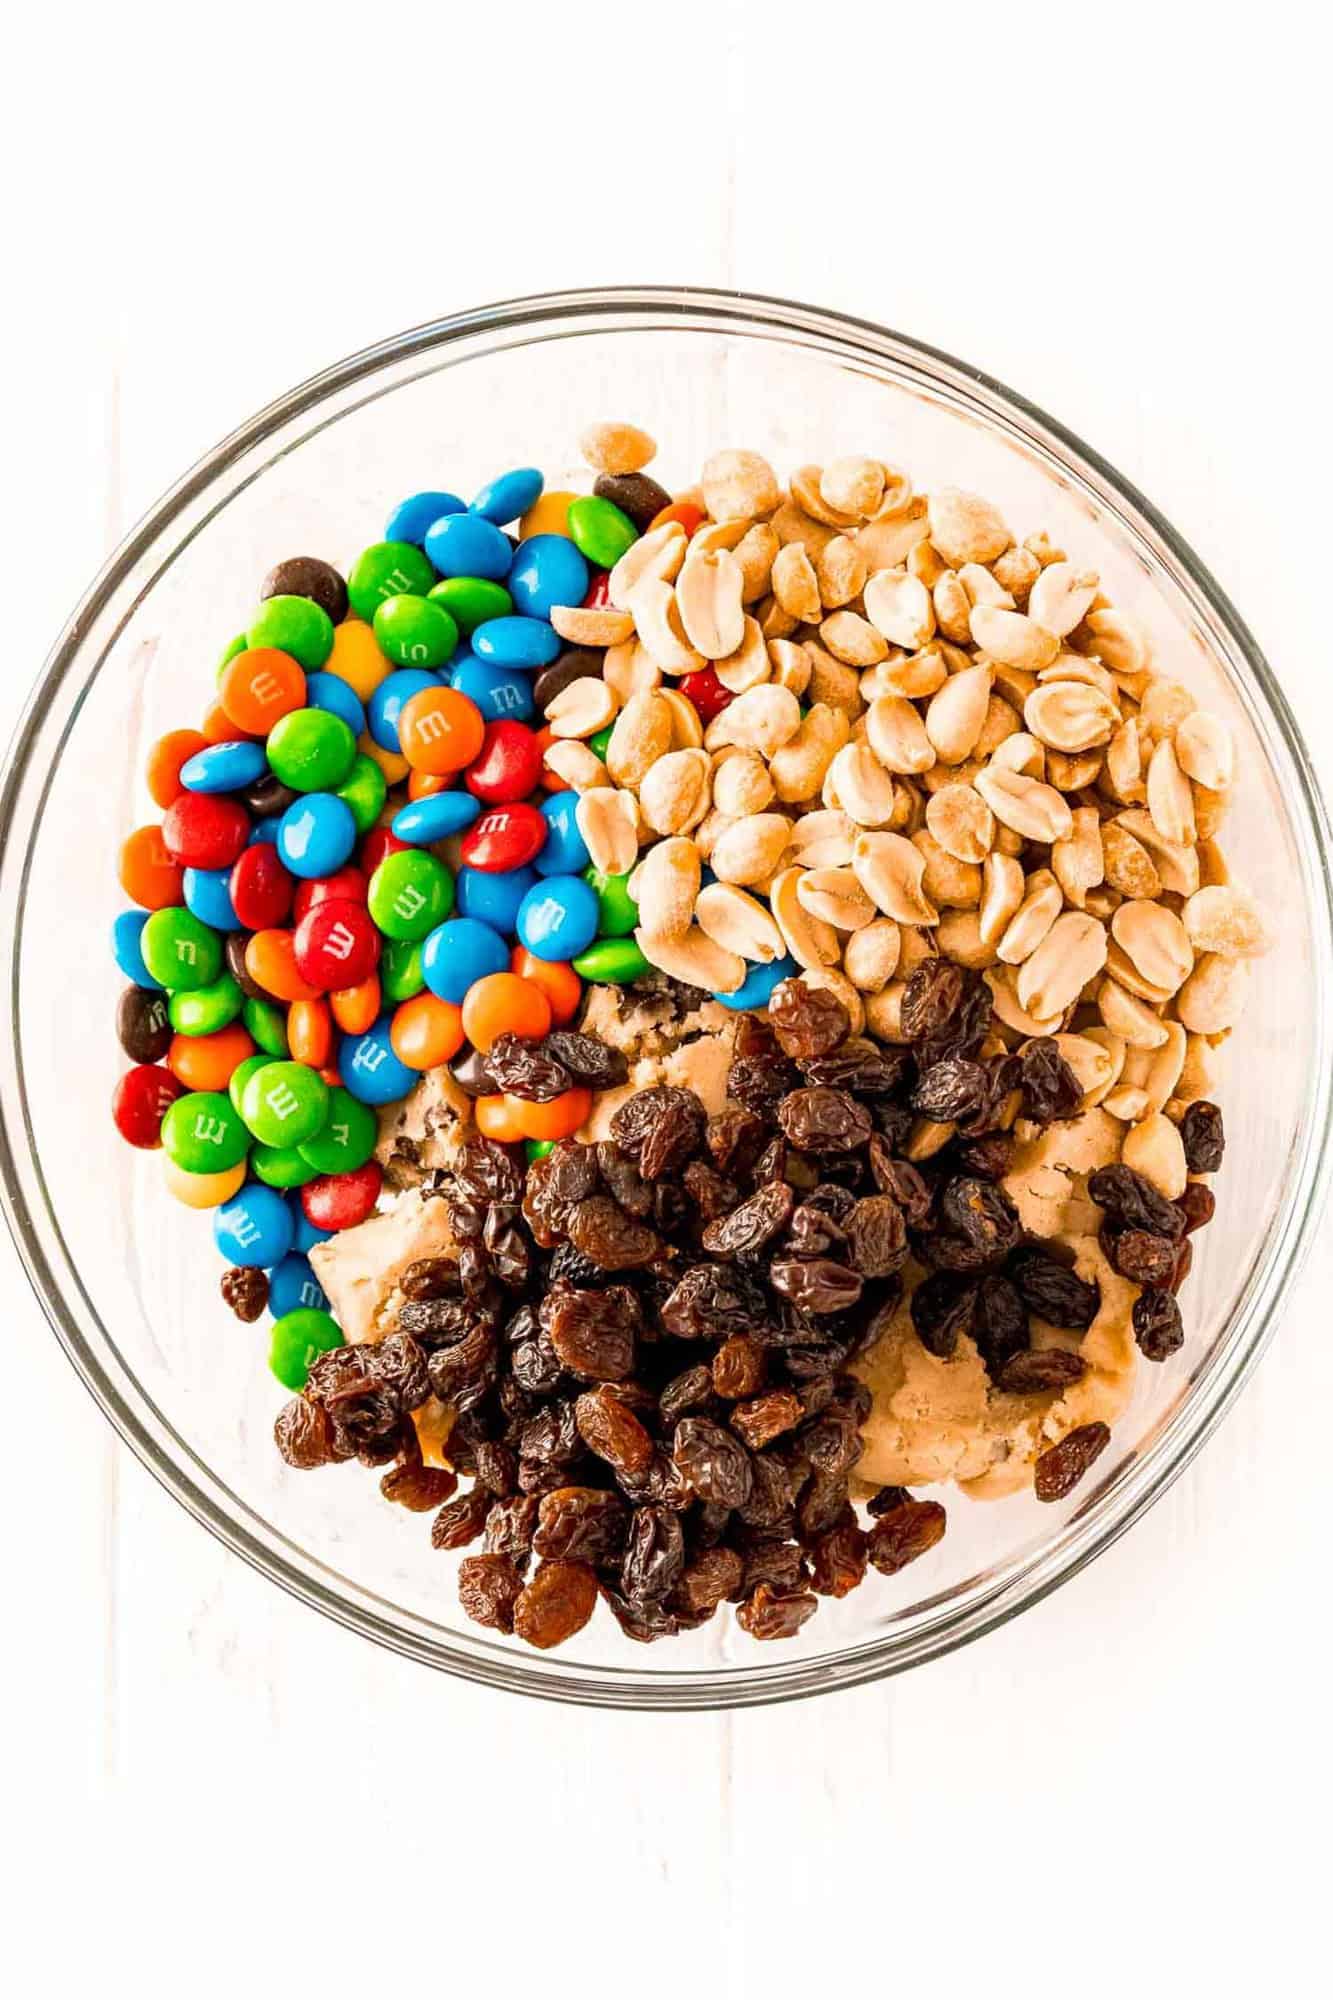 Unmixed cookie dough, raisins, m&m's, and peanuts in a glass bowl.